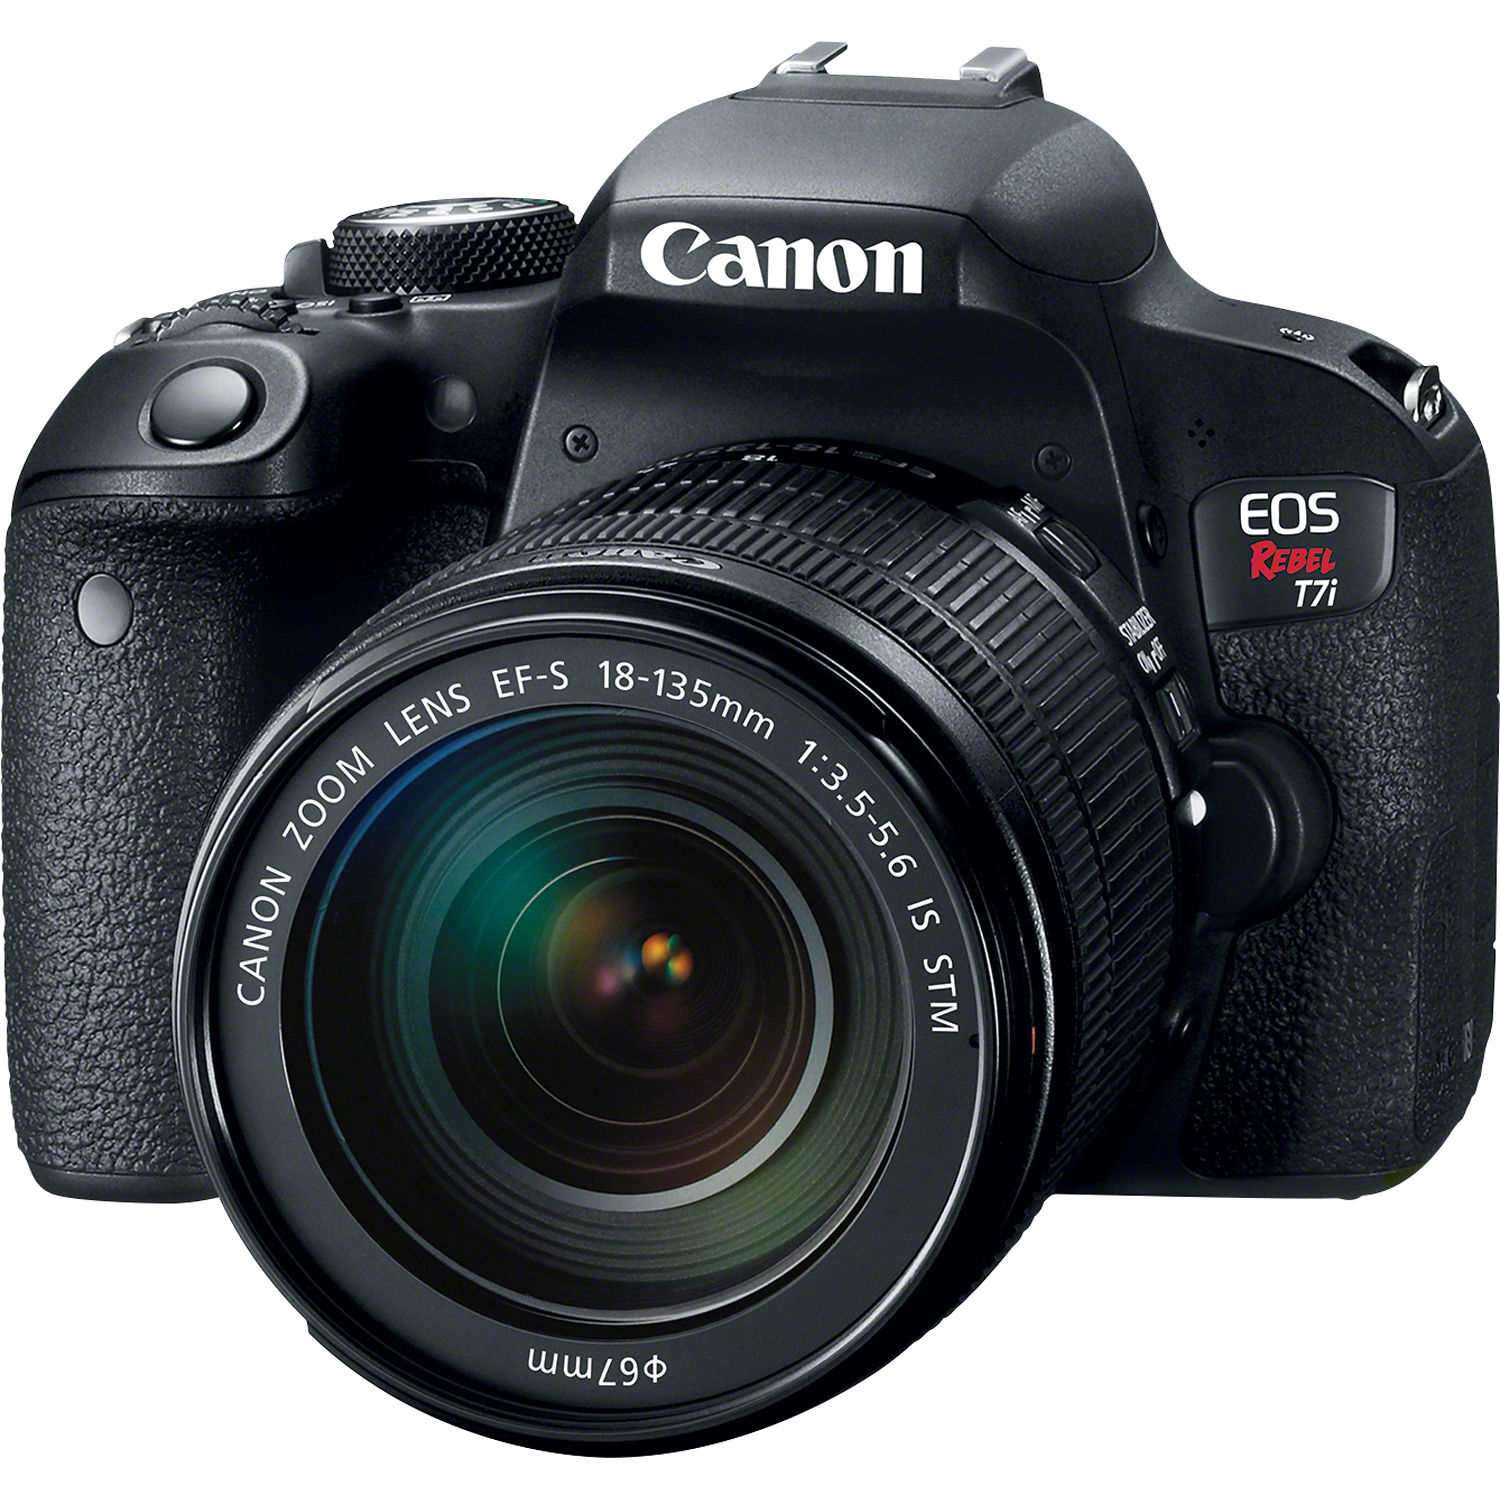 Canon EOS Rebel T7i DSLR Camera with 18-135mm Lens - image 1 of 7